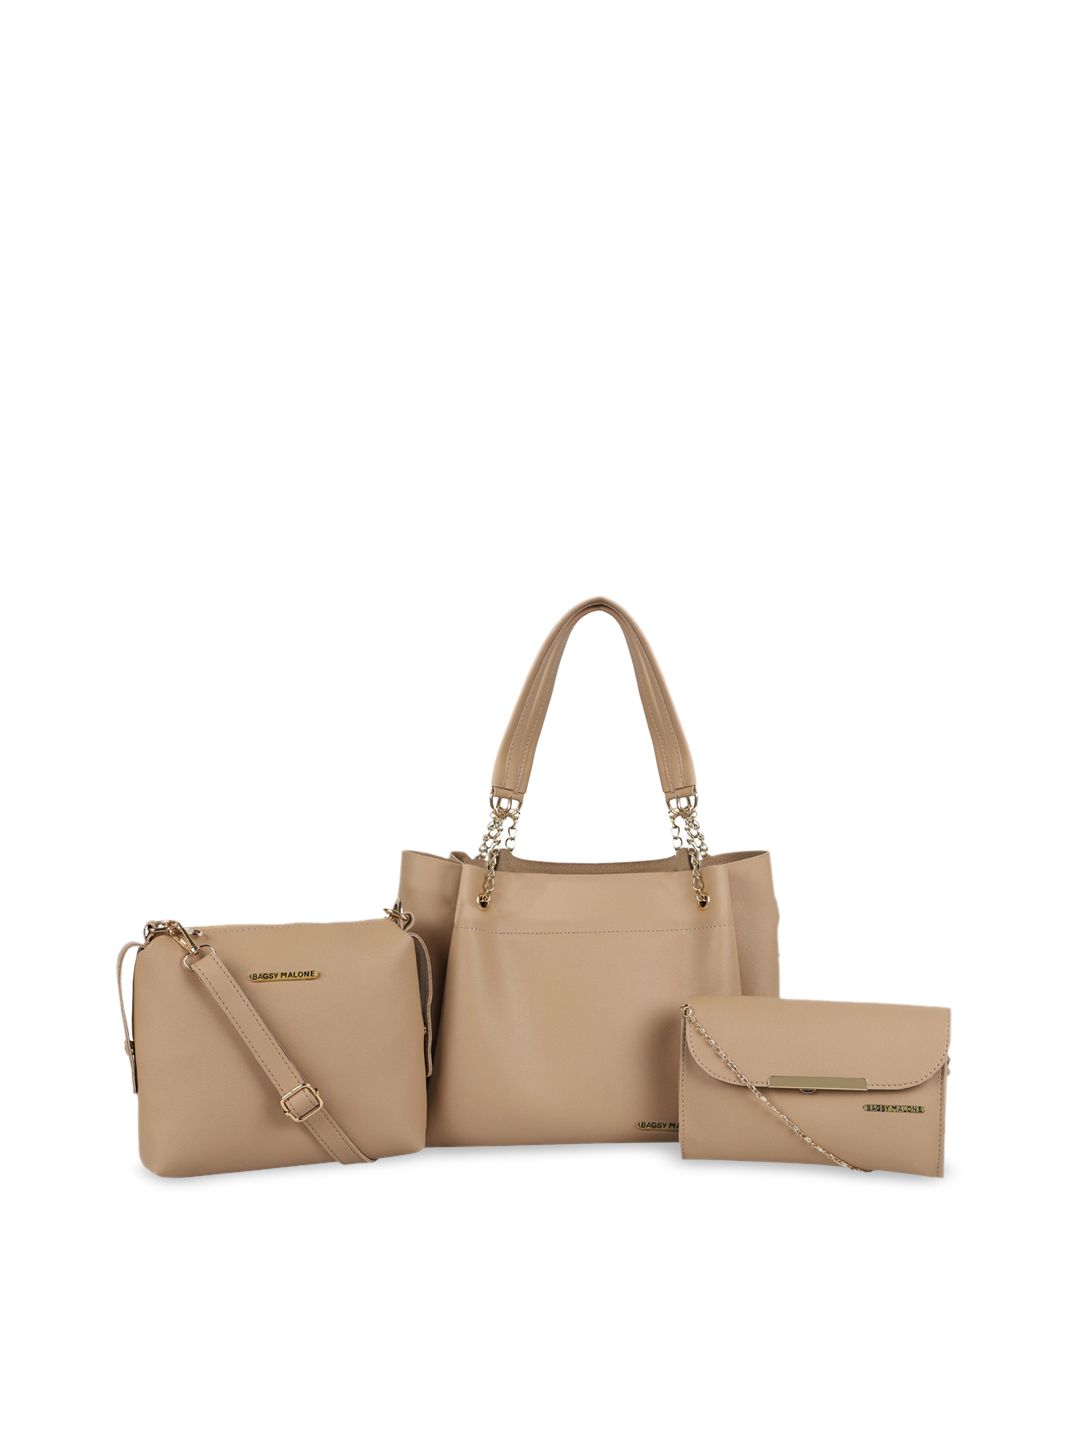 Bagsy Malone Beige Solid Shoulder Bag Price in India